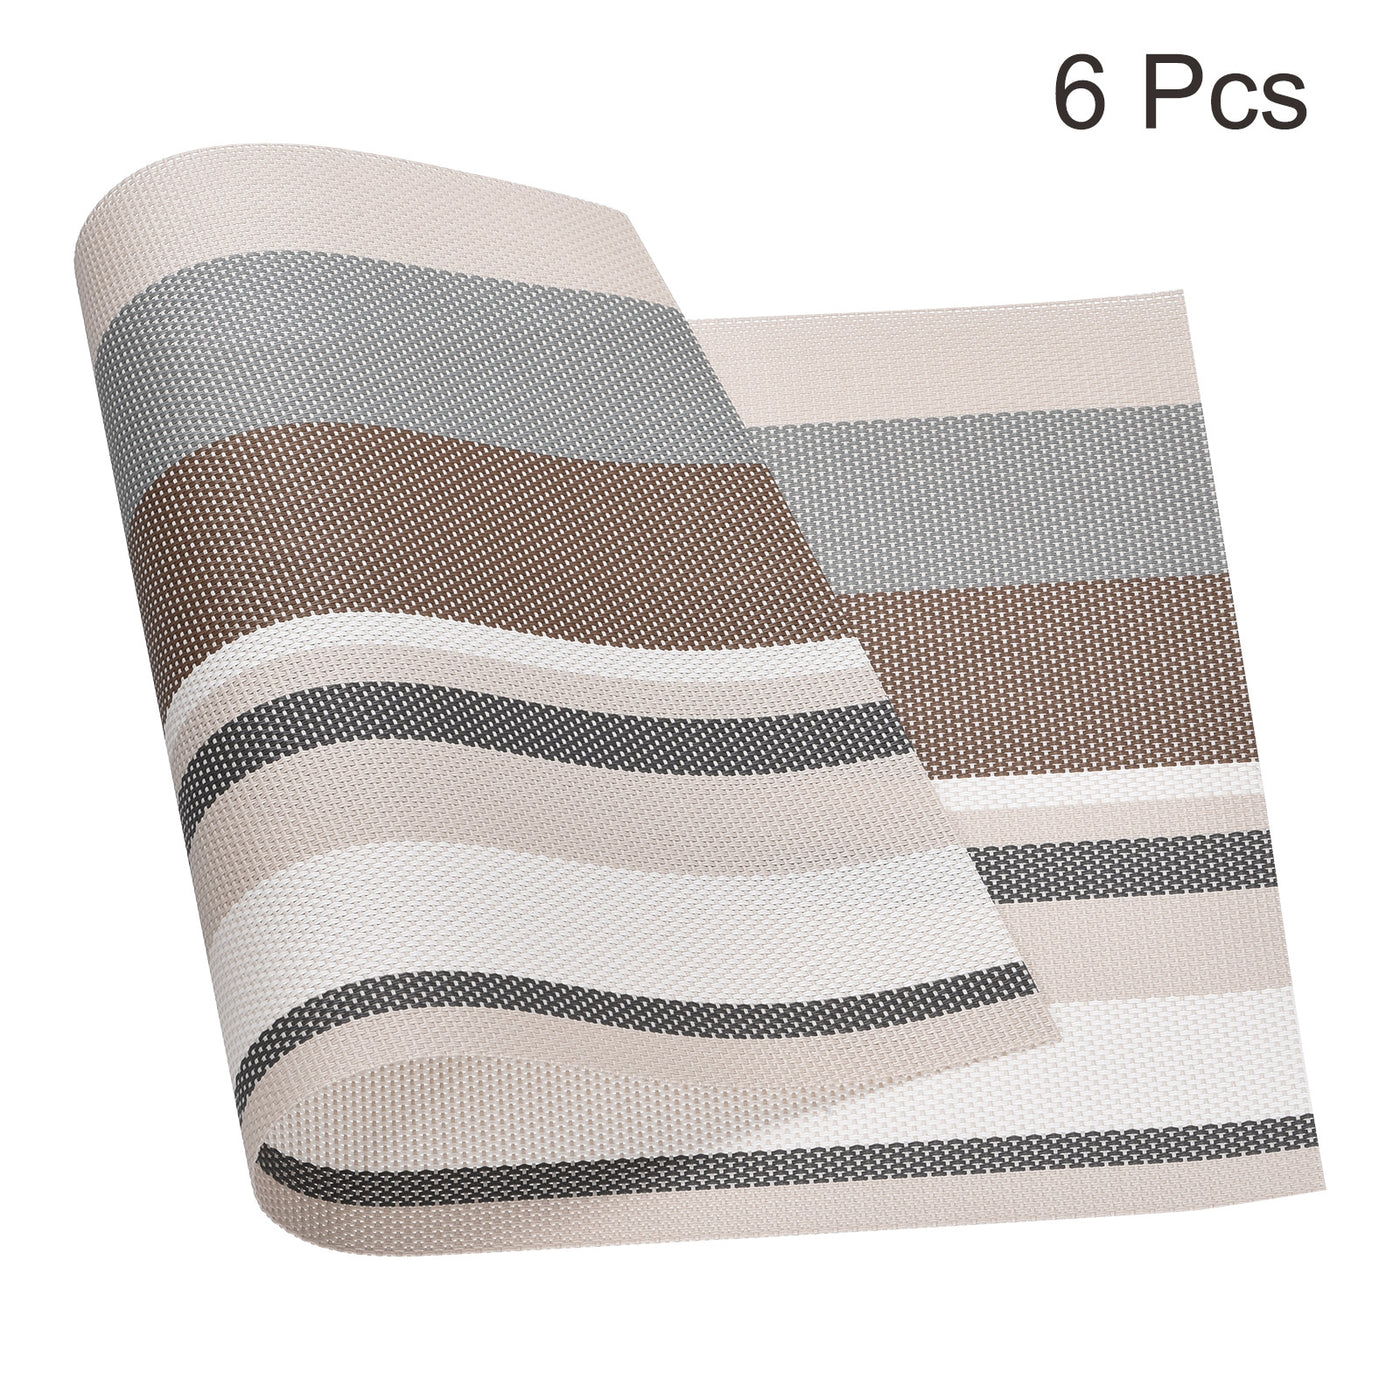 uxcell Uxcell Place Mats 450x300mm 6pcs PVC Table Washable Woven Placemat, Stripe Beige